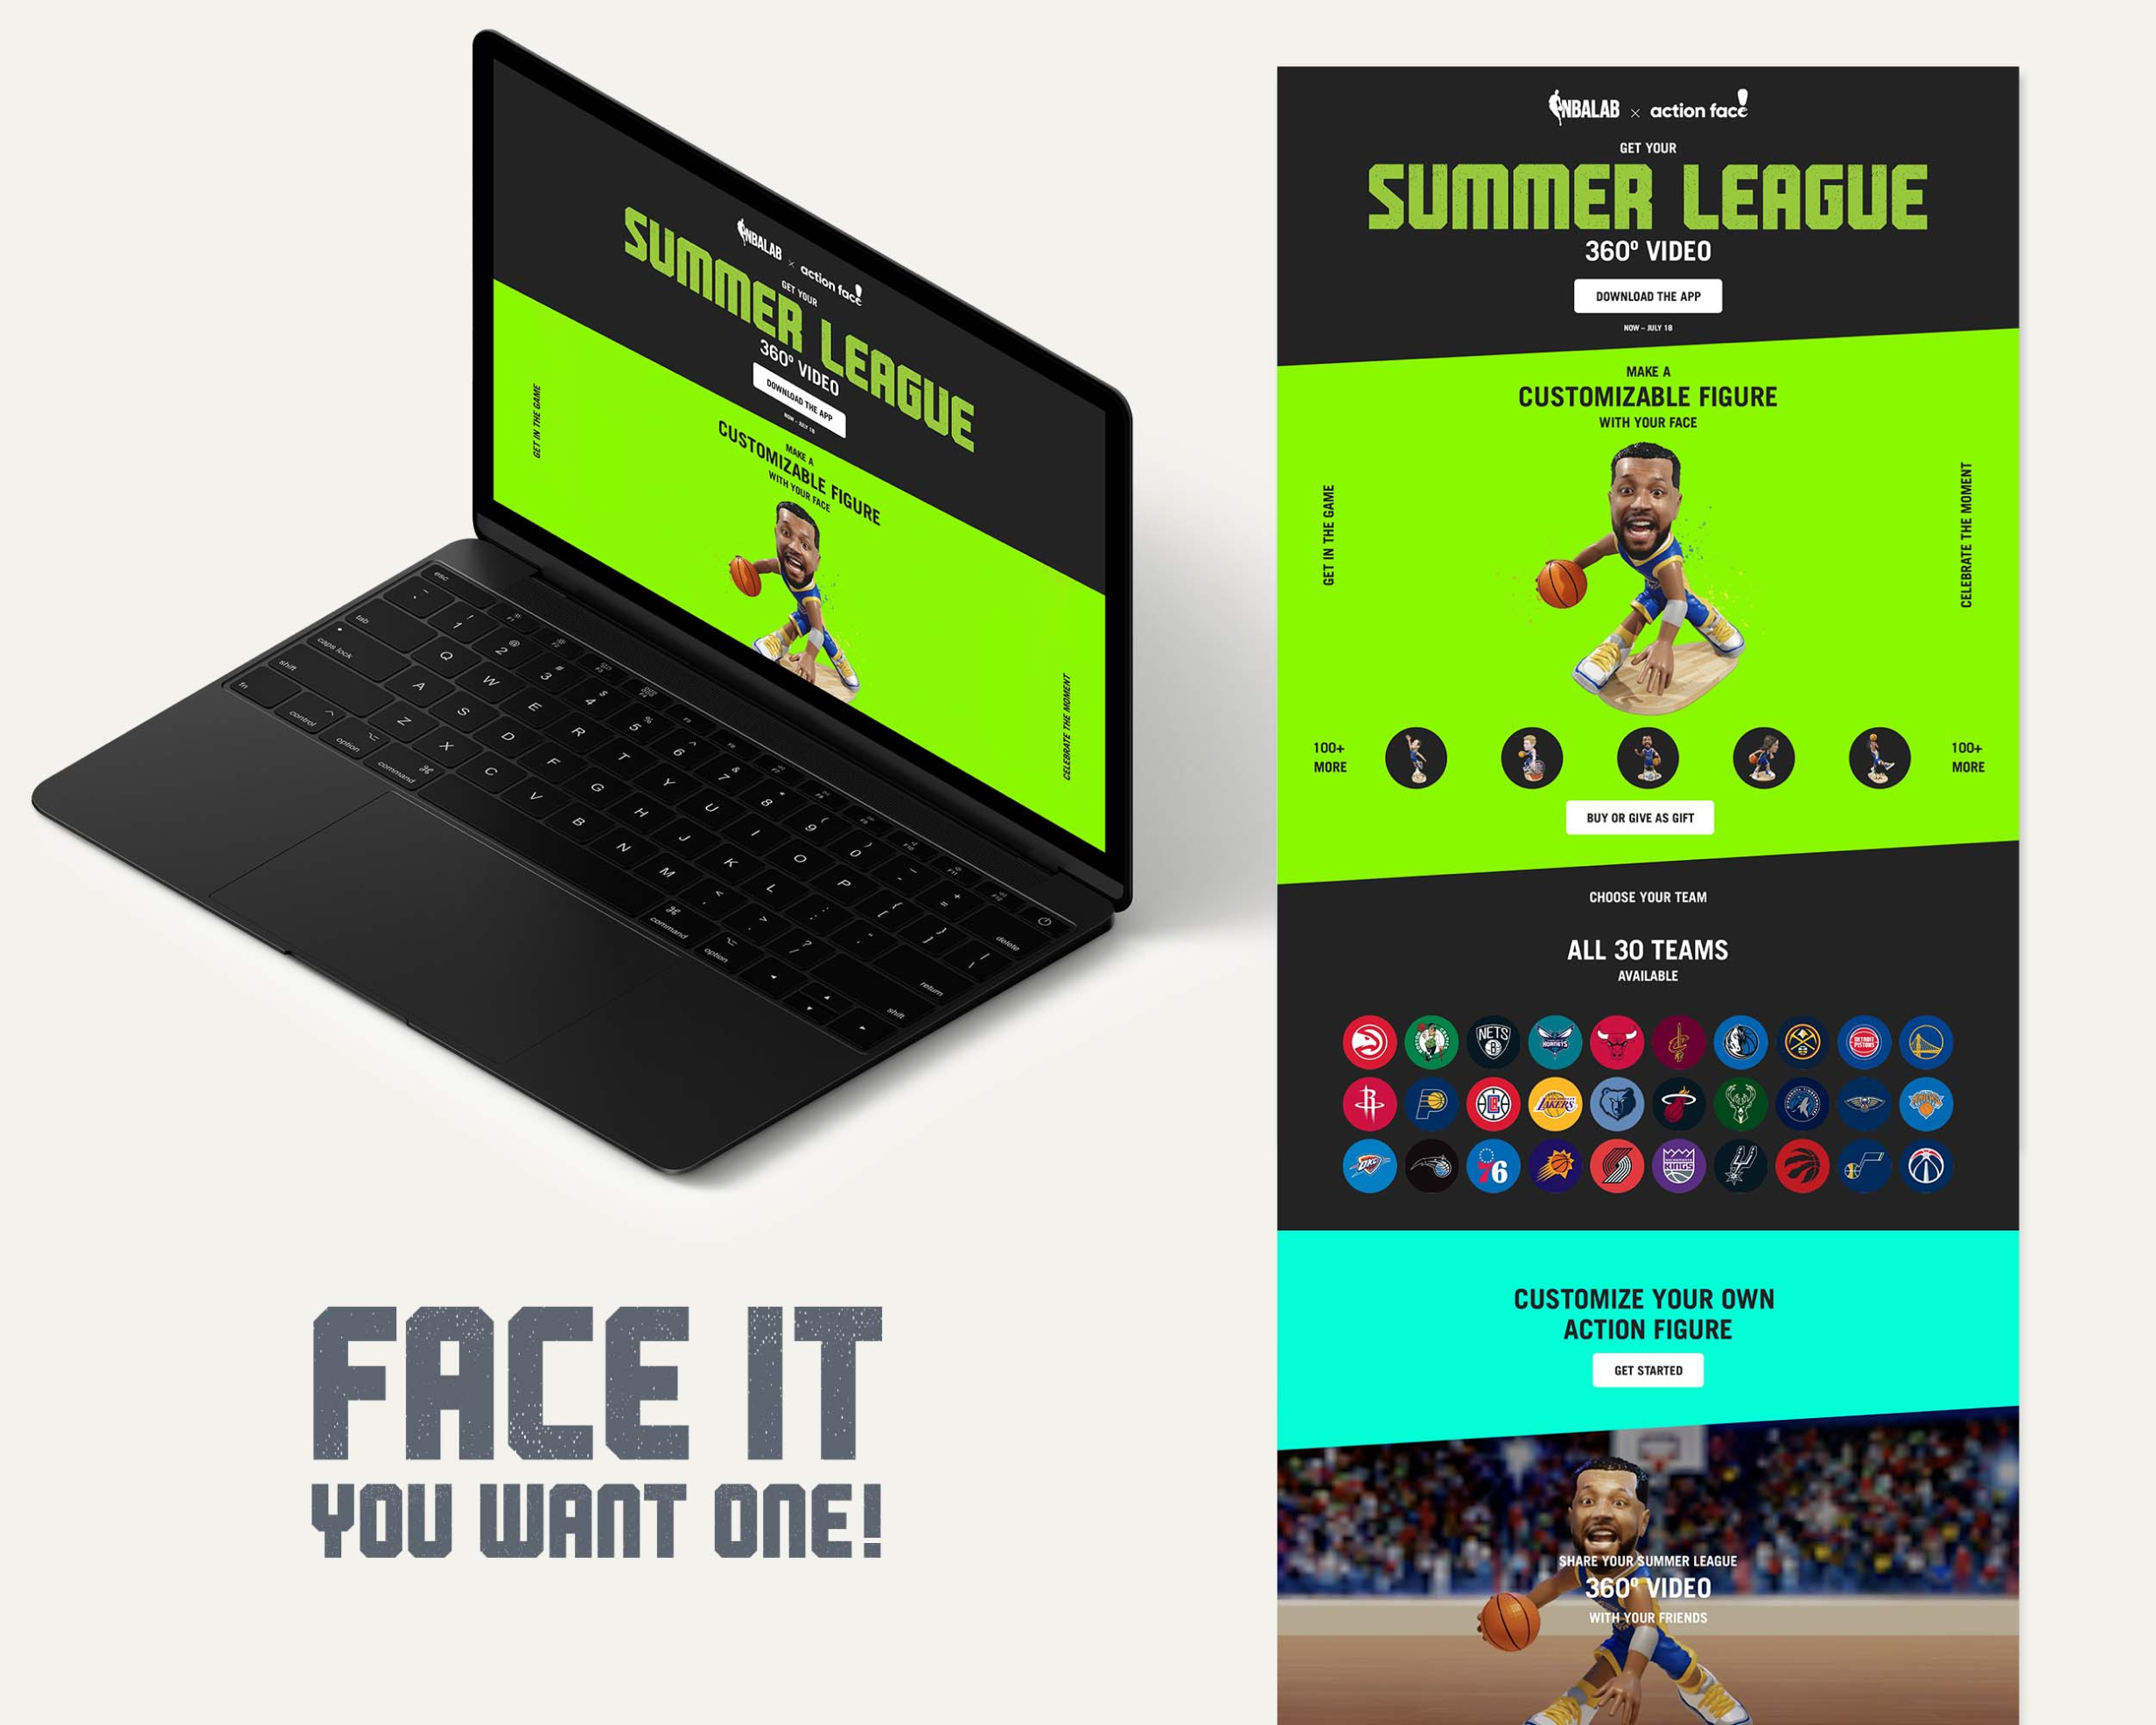 Showcase of Action Face website on laptop